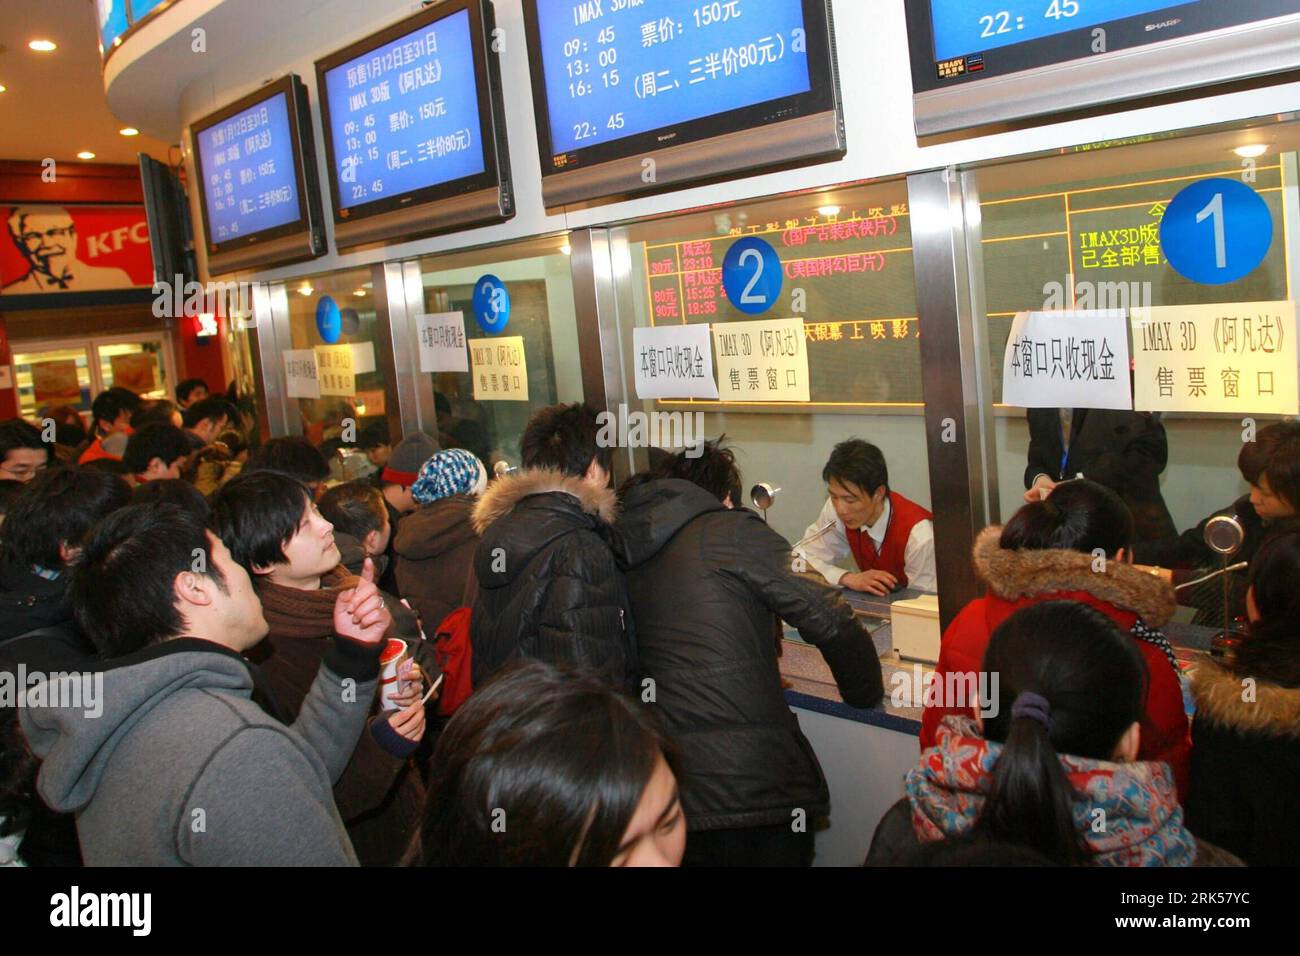 Bildnummer: 53718135  Datum: 10.01.2010  Copyright: imago/Xinhua (100111) -- SHANGHAI, Jan. 11, 2010 (Xinhua) -- queue up for tickets for the American science fiction movie Avatar at the Heping Cinema in downtown Shanghai, China, in the early morning of Jan. 10, 2010. The cinema which holds the only one IMAX screen in Shanghai implements 24 hours ticket-sale service to meet the increasing demands from the public. (Xinhua/Zhu Liangcheng) (wyx) (3)CHINA-SHANGHAI-AVATAR HEAT (CN) PUBLICATIONxNOTxINxCHN Film Kino Avatar Warteschlange Masse Kbdig xdp 2010 quer premiumd o0 Andrang, Kasse, Kinokasse Stock Photo